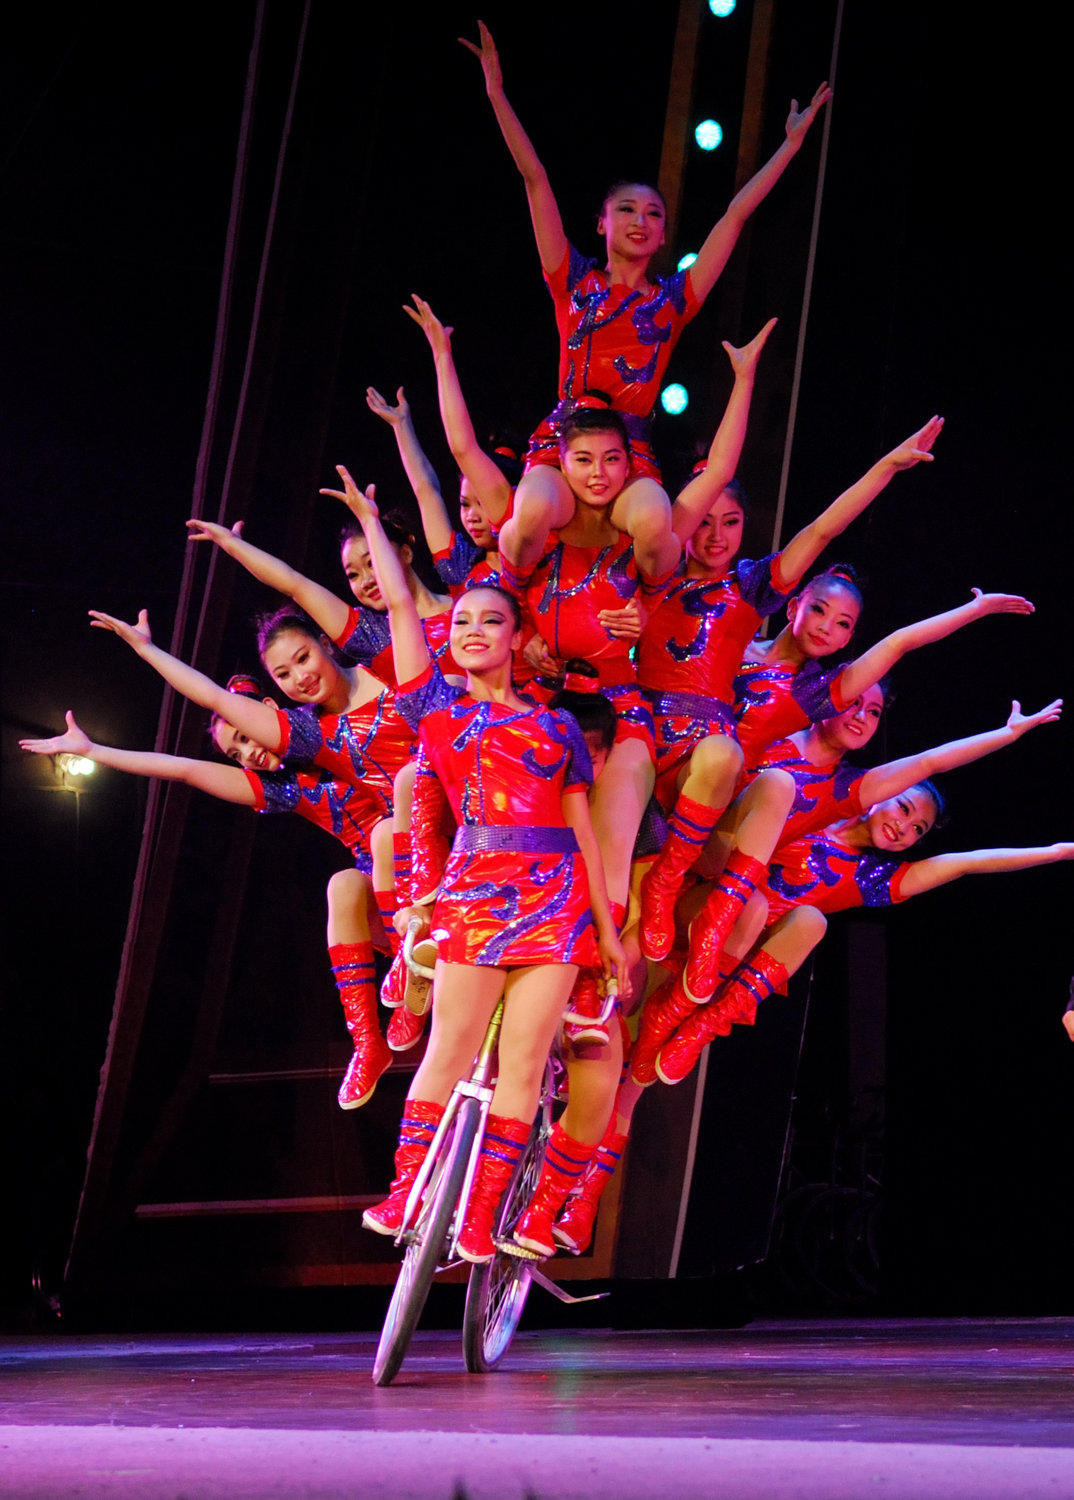 'Cirque Mei' will bring its blend of traditional and contemporary Chinese circus acts to the Lehman Center for the Performing Arts on Oct. 13.